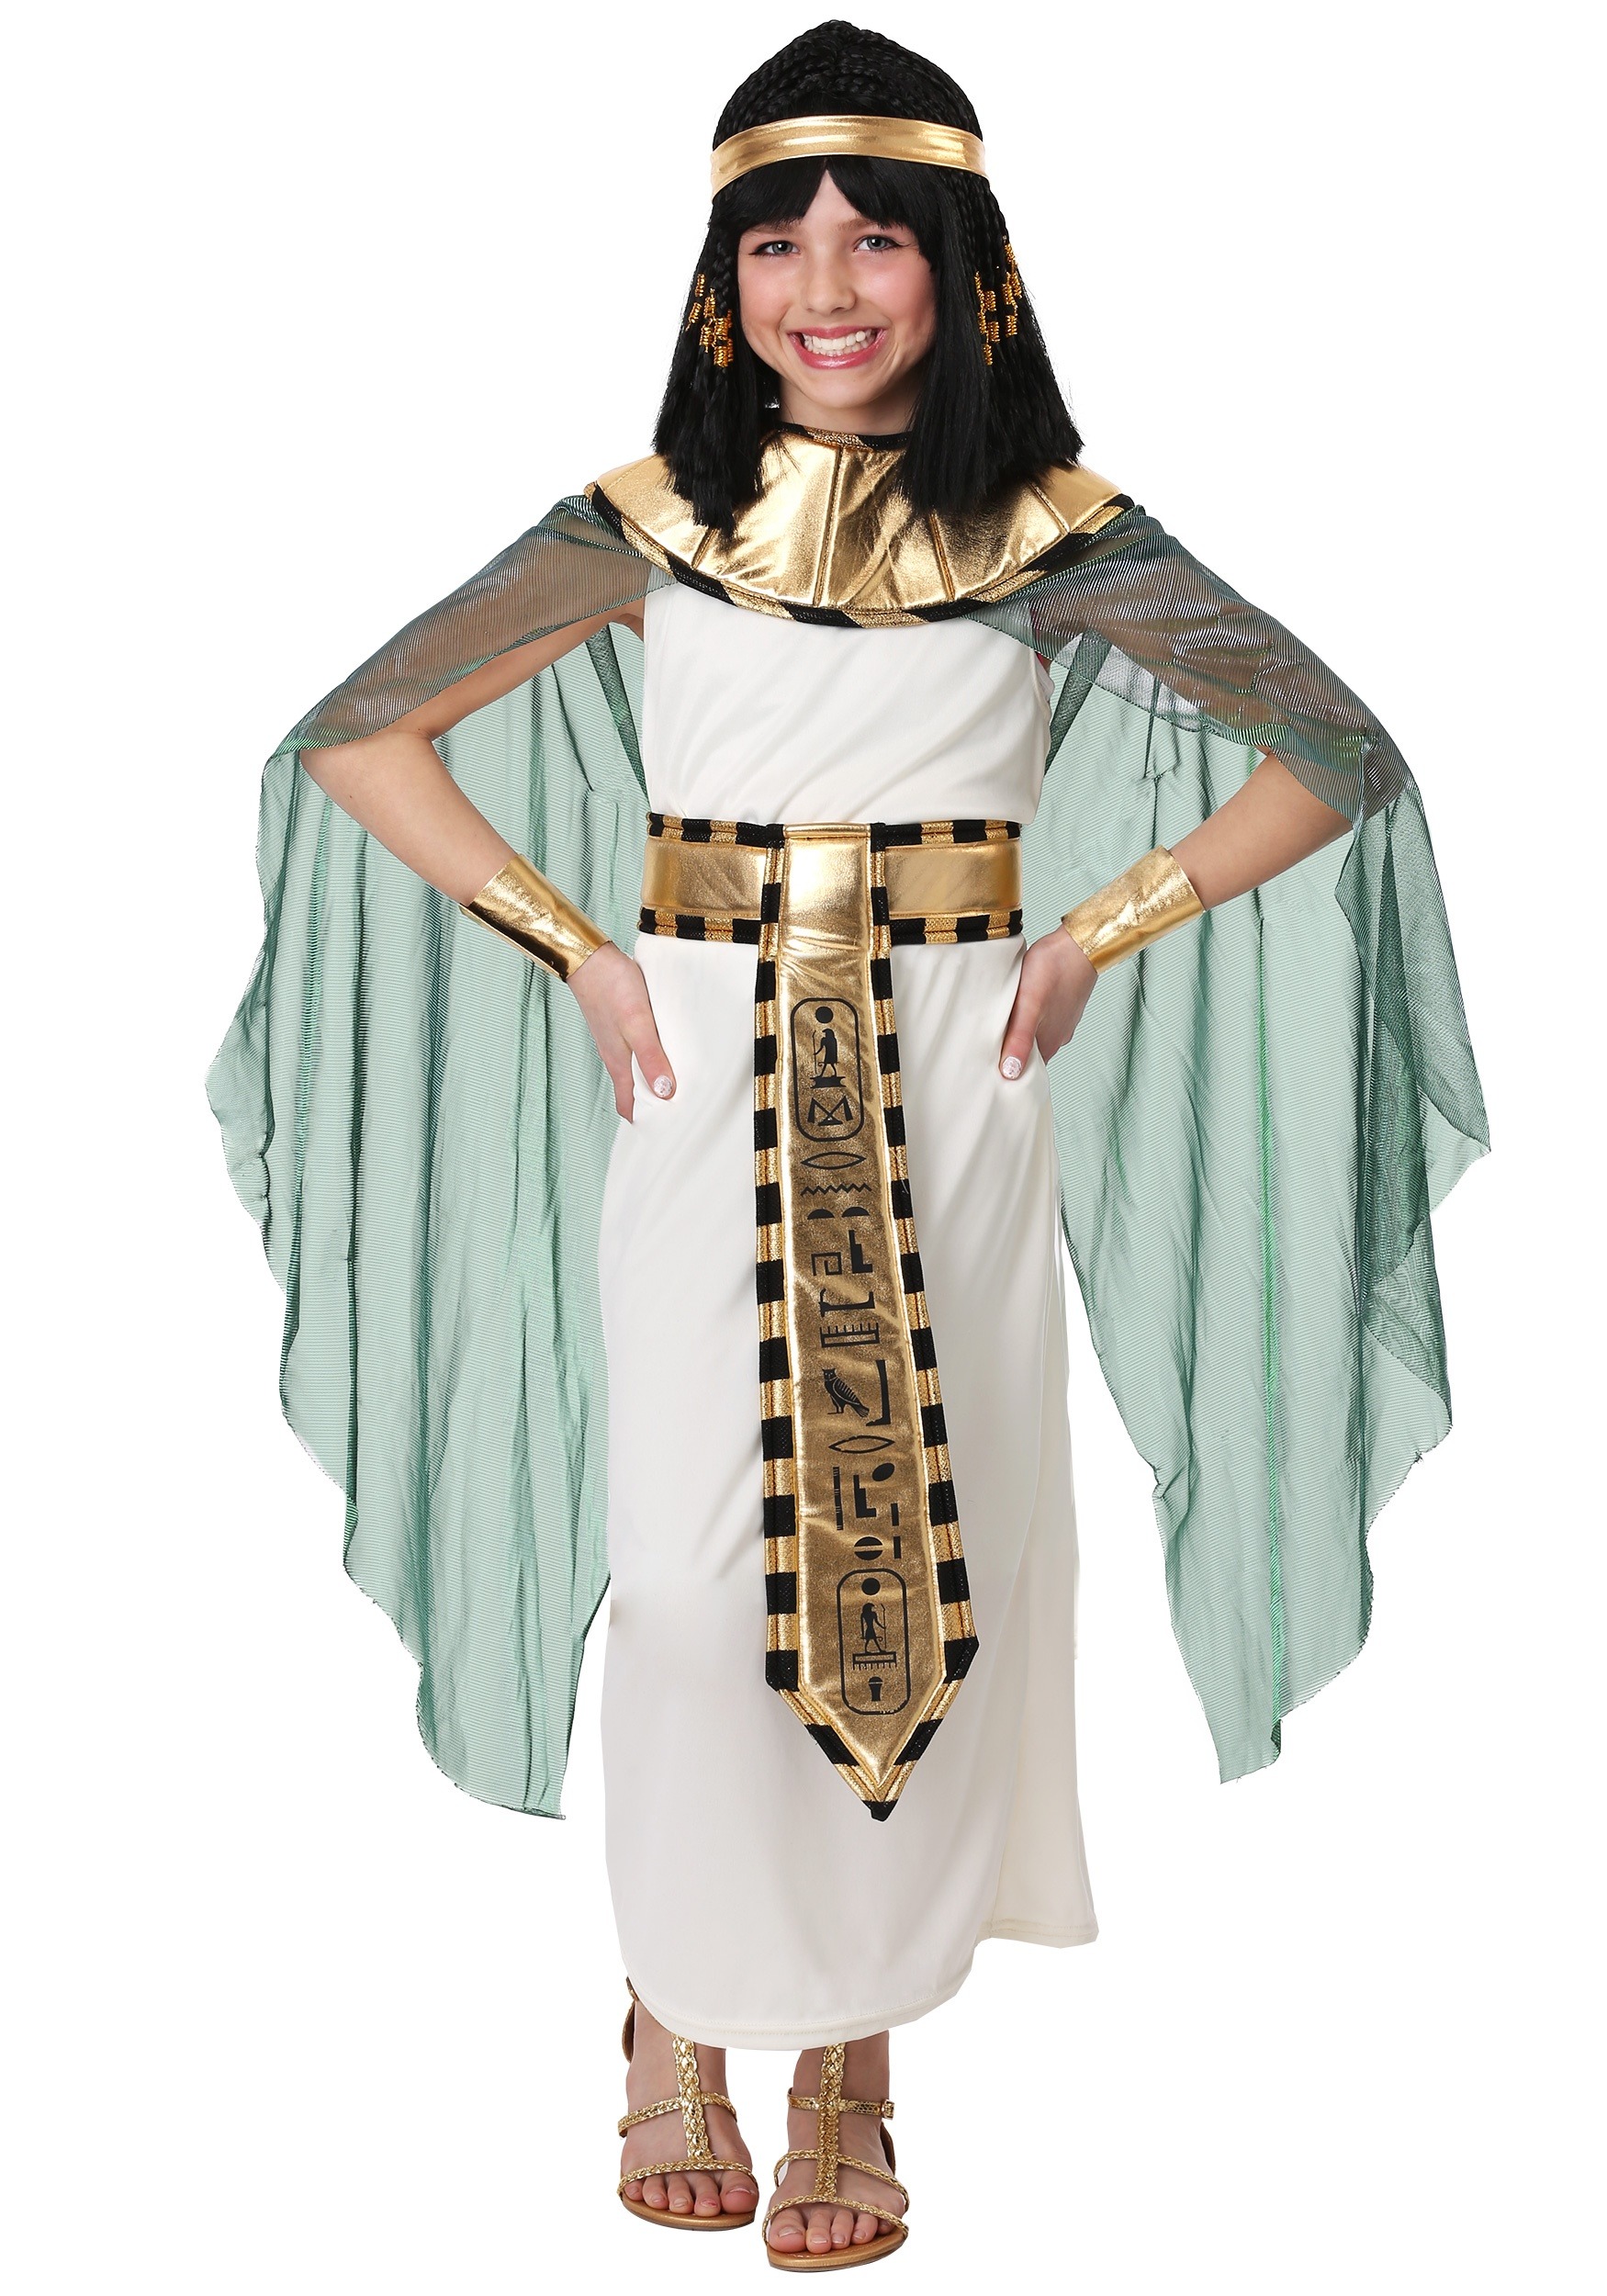 Photos - Fancy Dress FUN Costumes Girl's Queen of the Nile Costume Green/White FUN6973CH